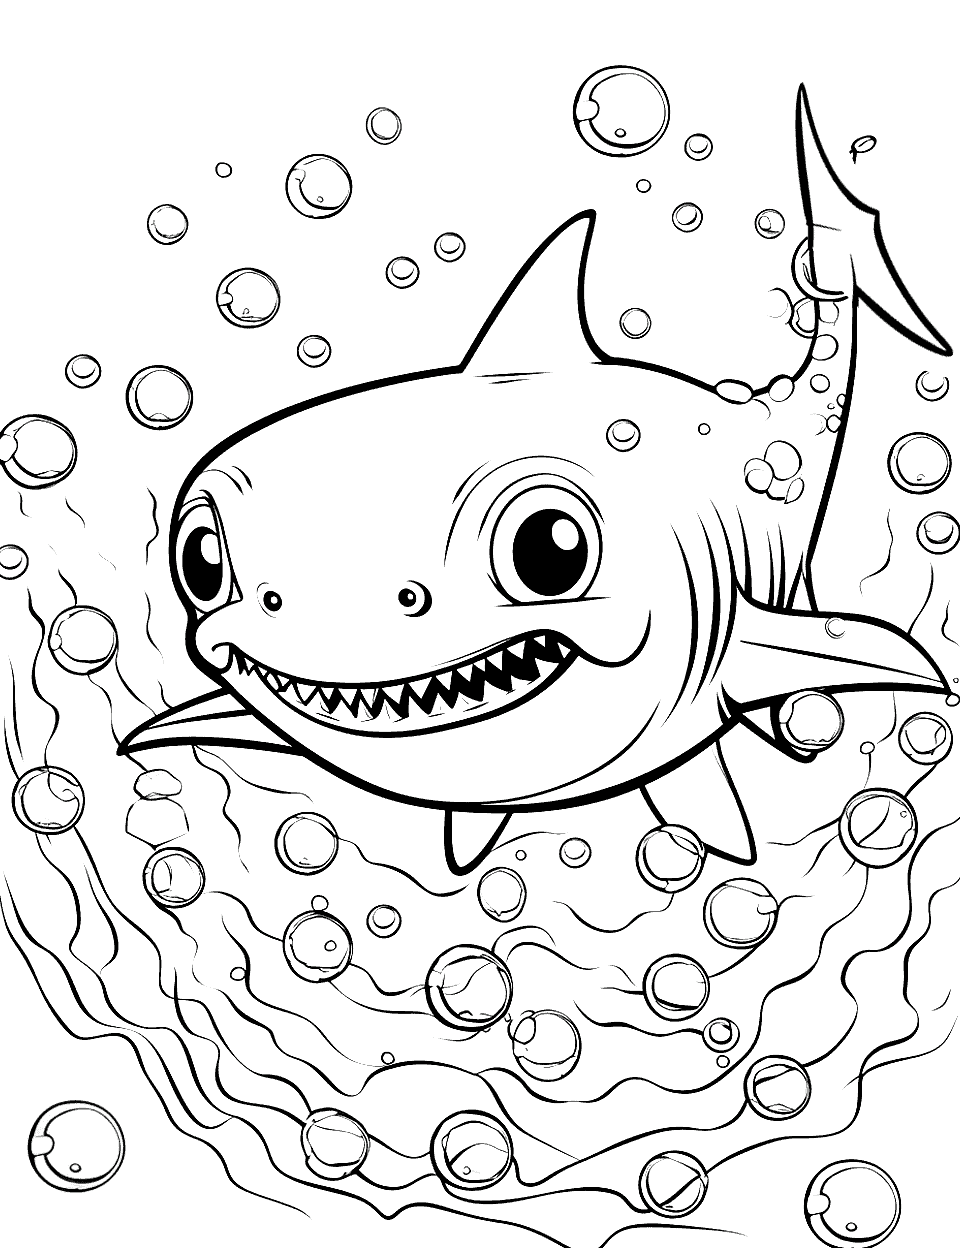 Baby Shark's Frenzy Shark Coloring Page - Baby Shark navigating through a frenzy zone made of bubbles.